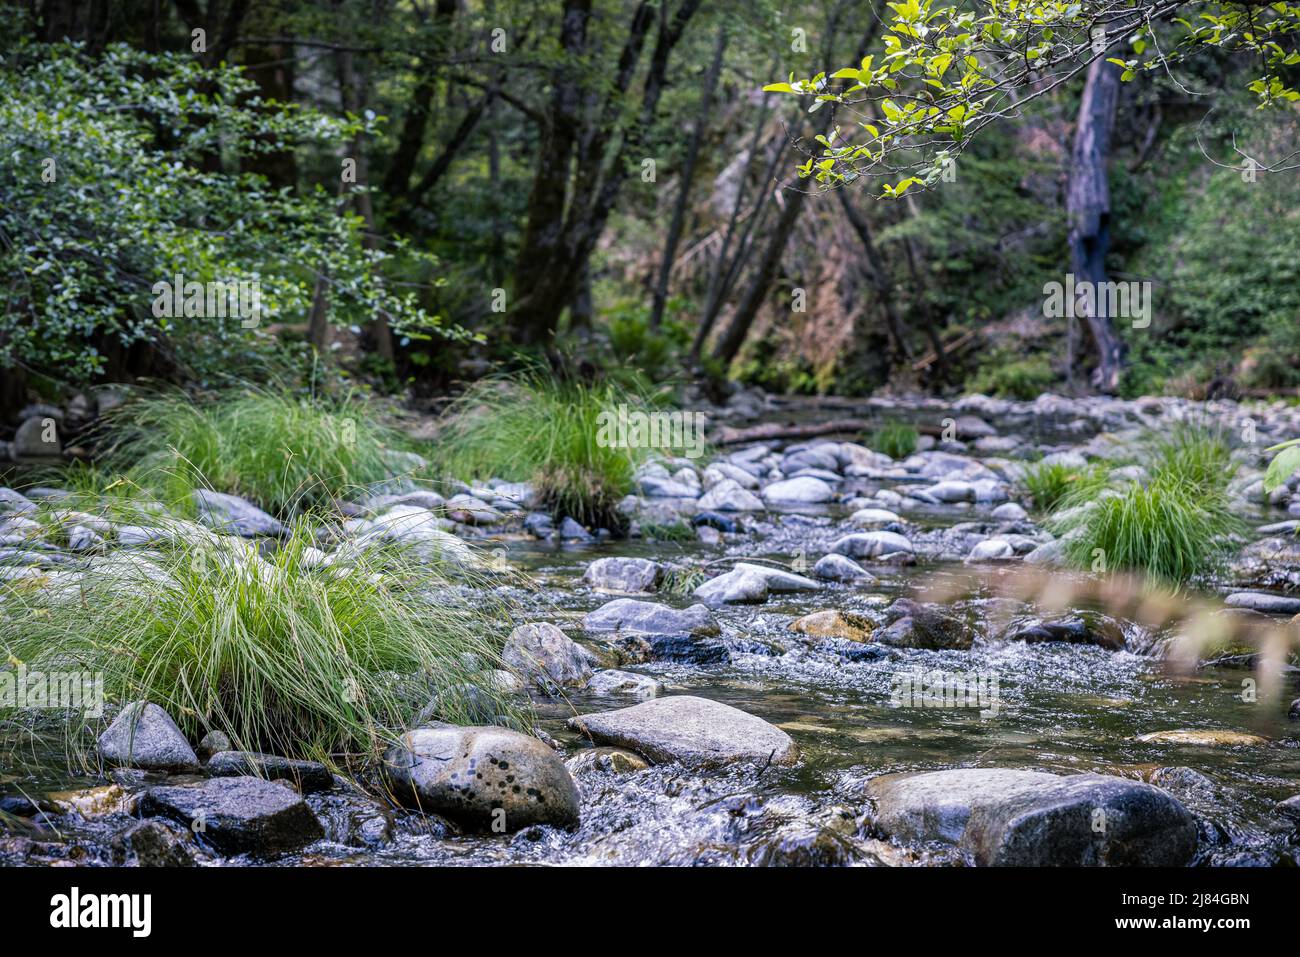 The Big Sur river, a National Wild and Scenic River. Early morning in May. Stock Photo